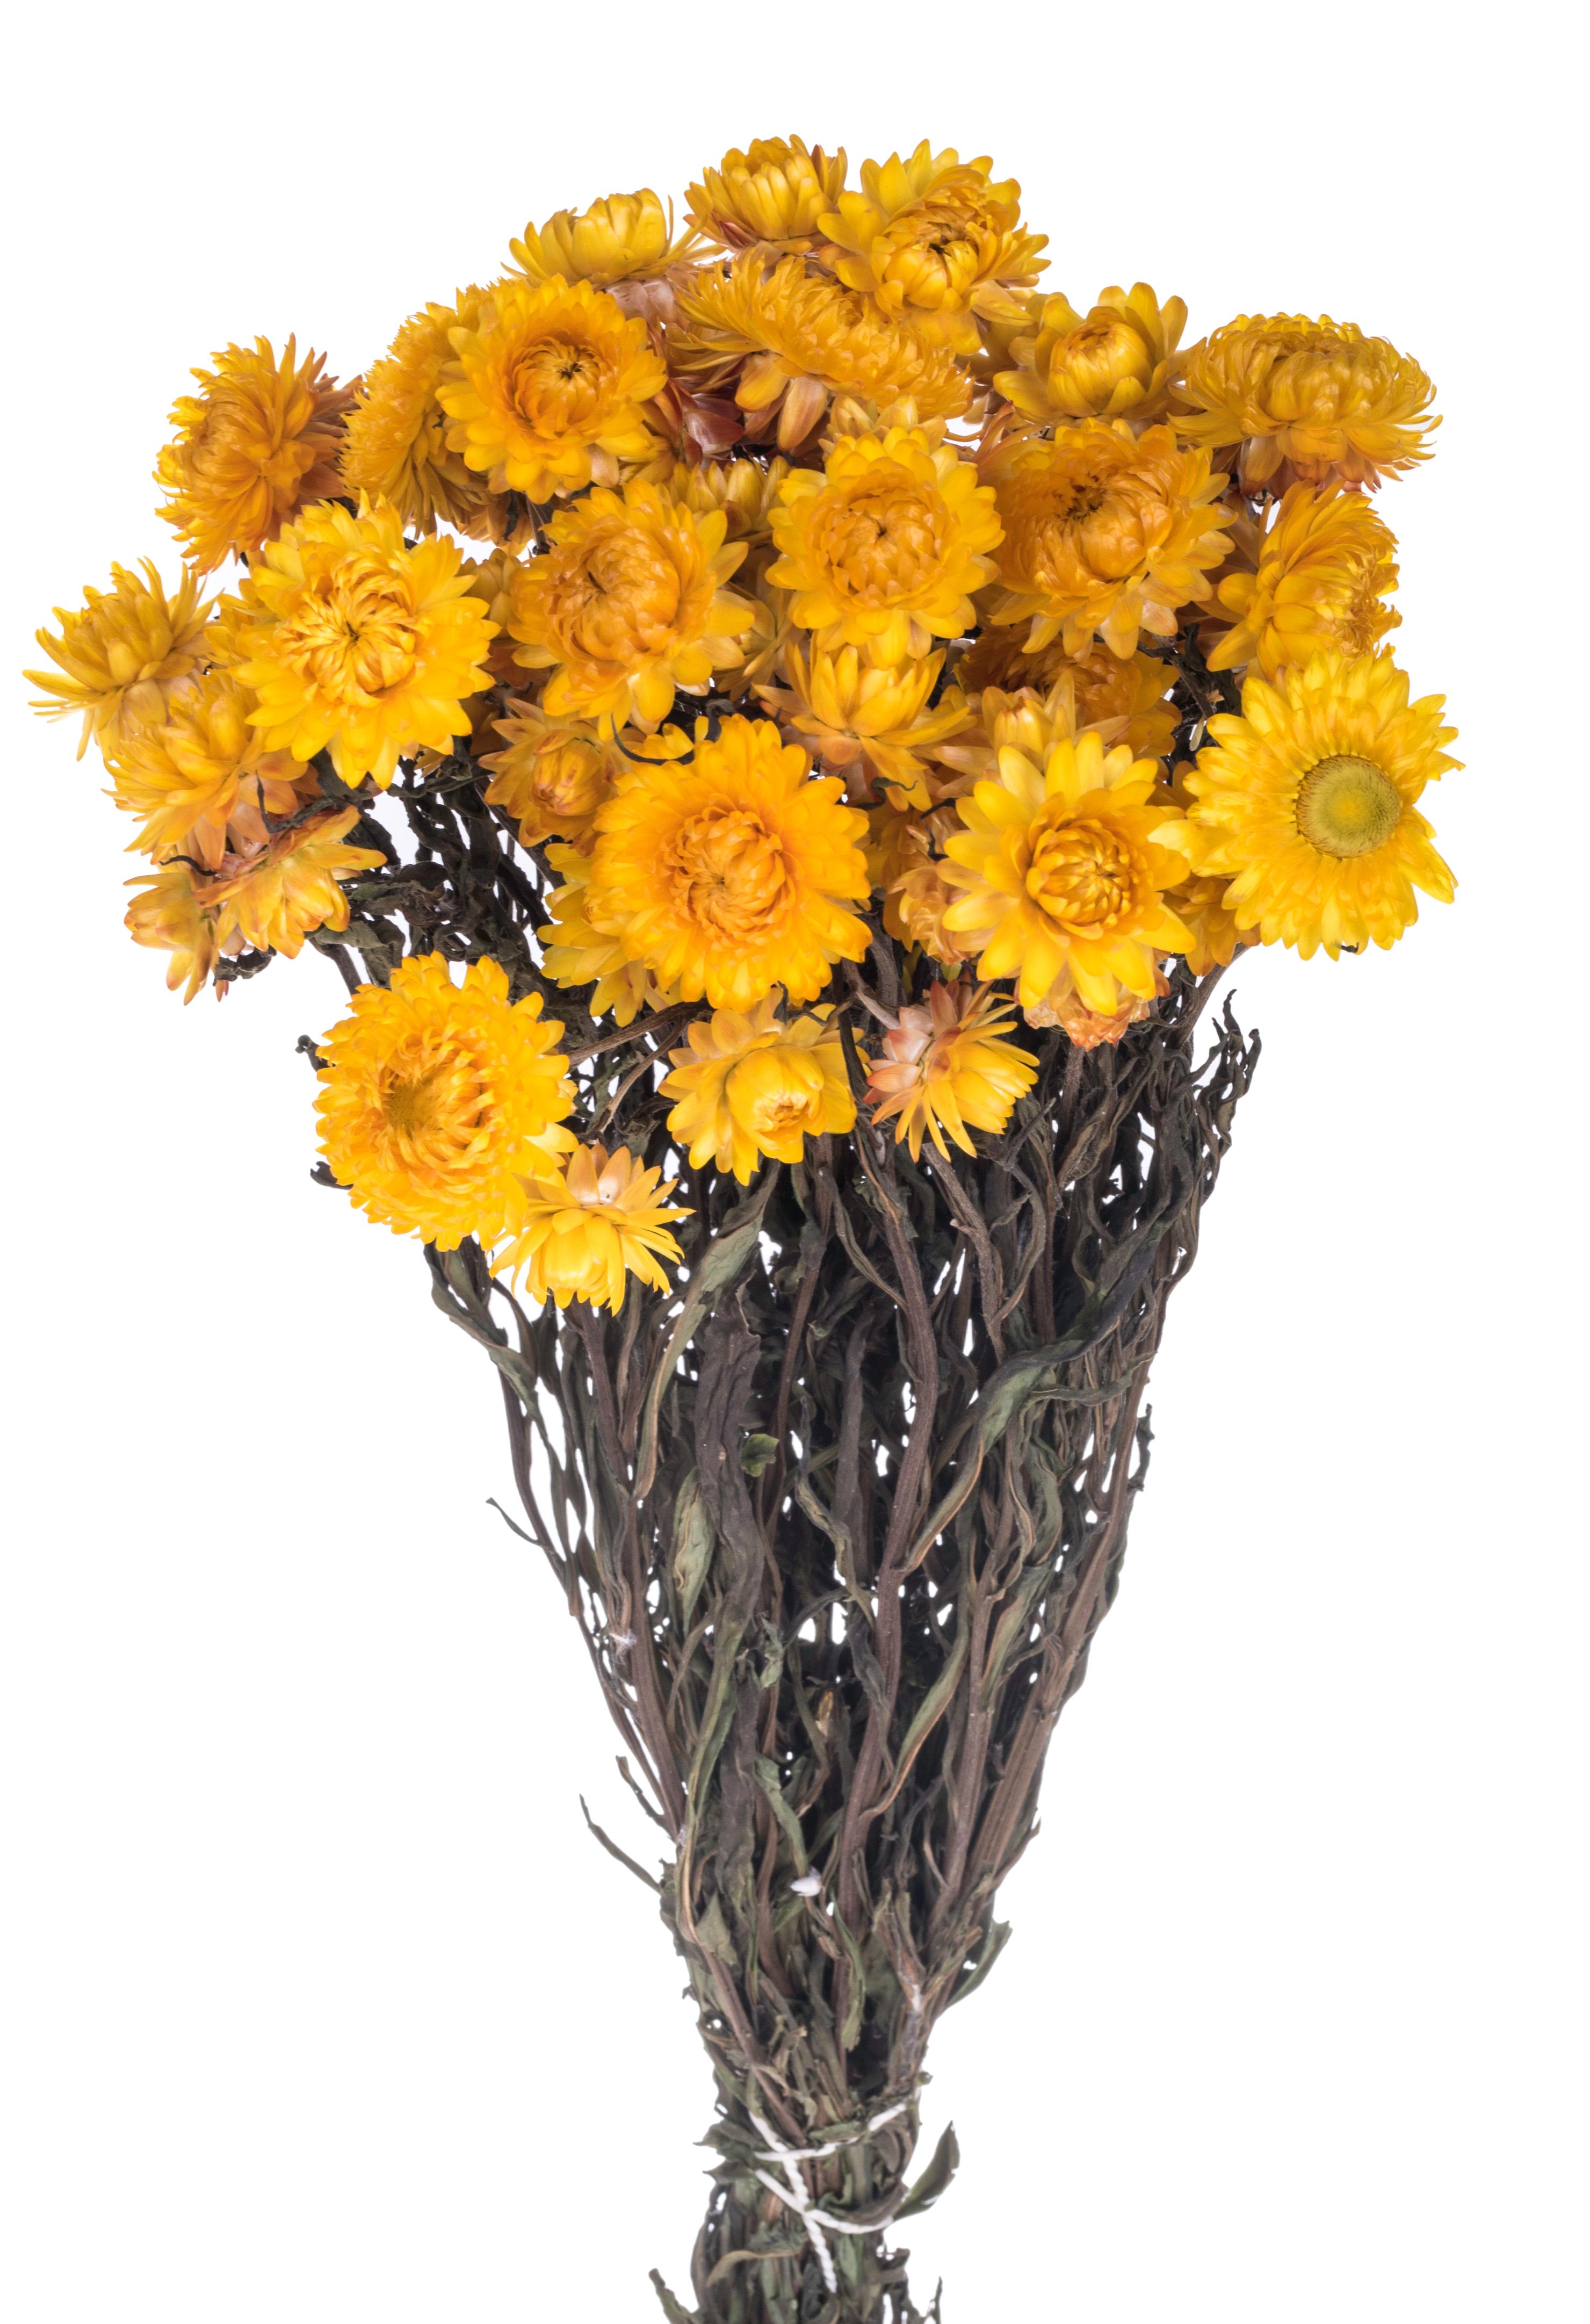 NATURAL PRODUCTS DRIED FLOWERS AND ERBS, FLOWERS, FRUITS AND NATURAL PROTEES, HELICHRYSUM MAZZO NAT.40 CM NO SACCO